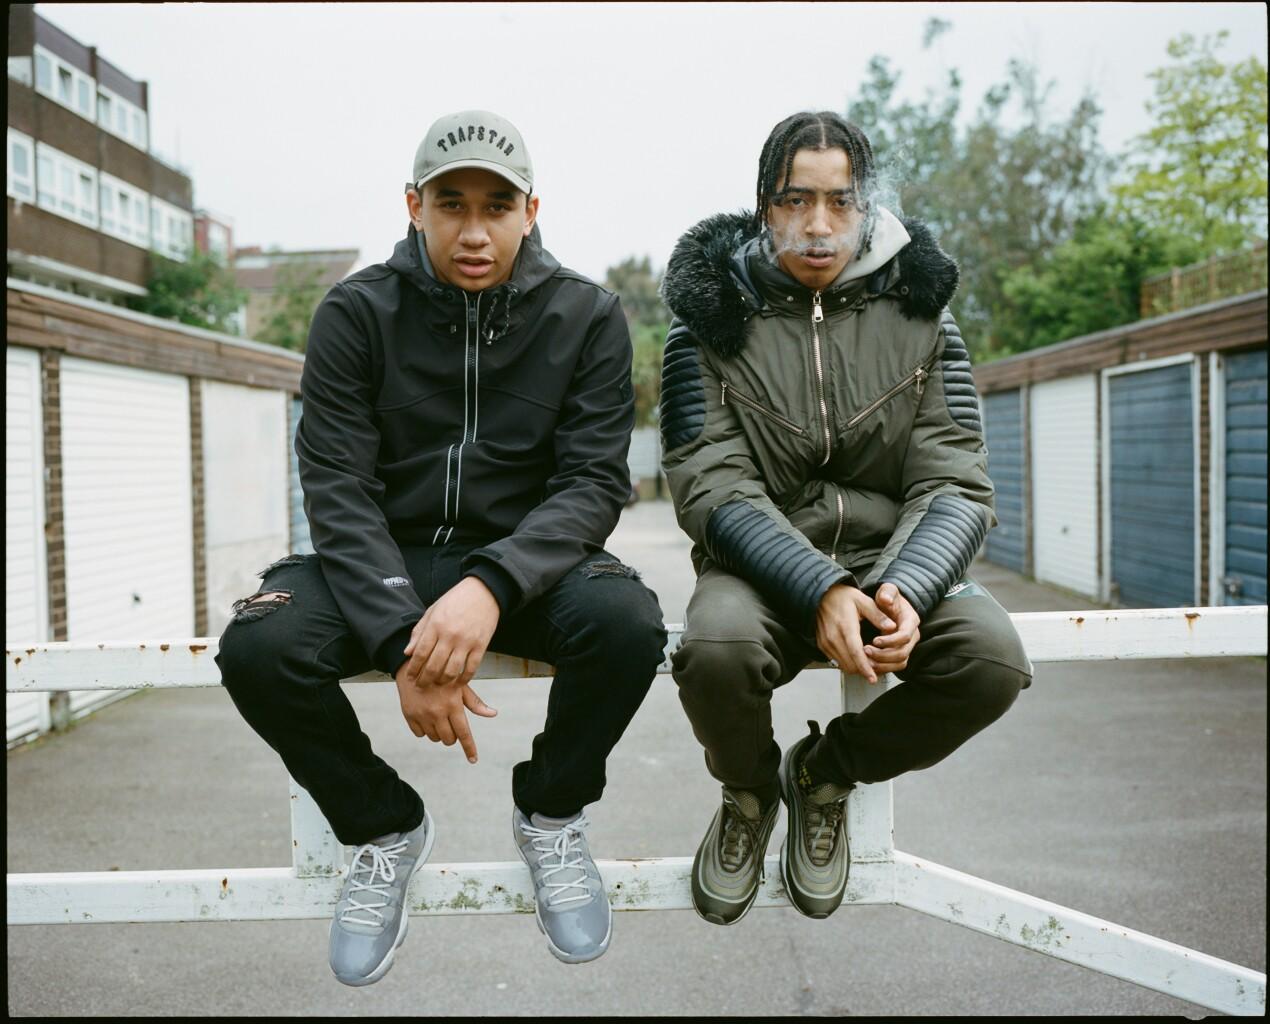 MK The Plug and M1 On The Beat are UK drill's brightest hope